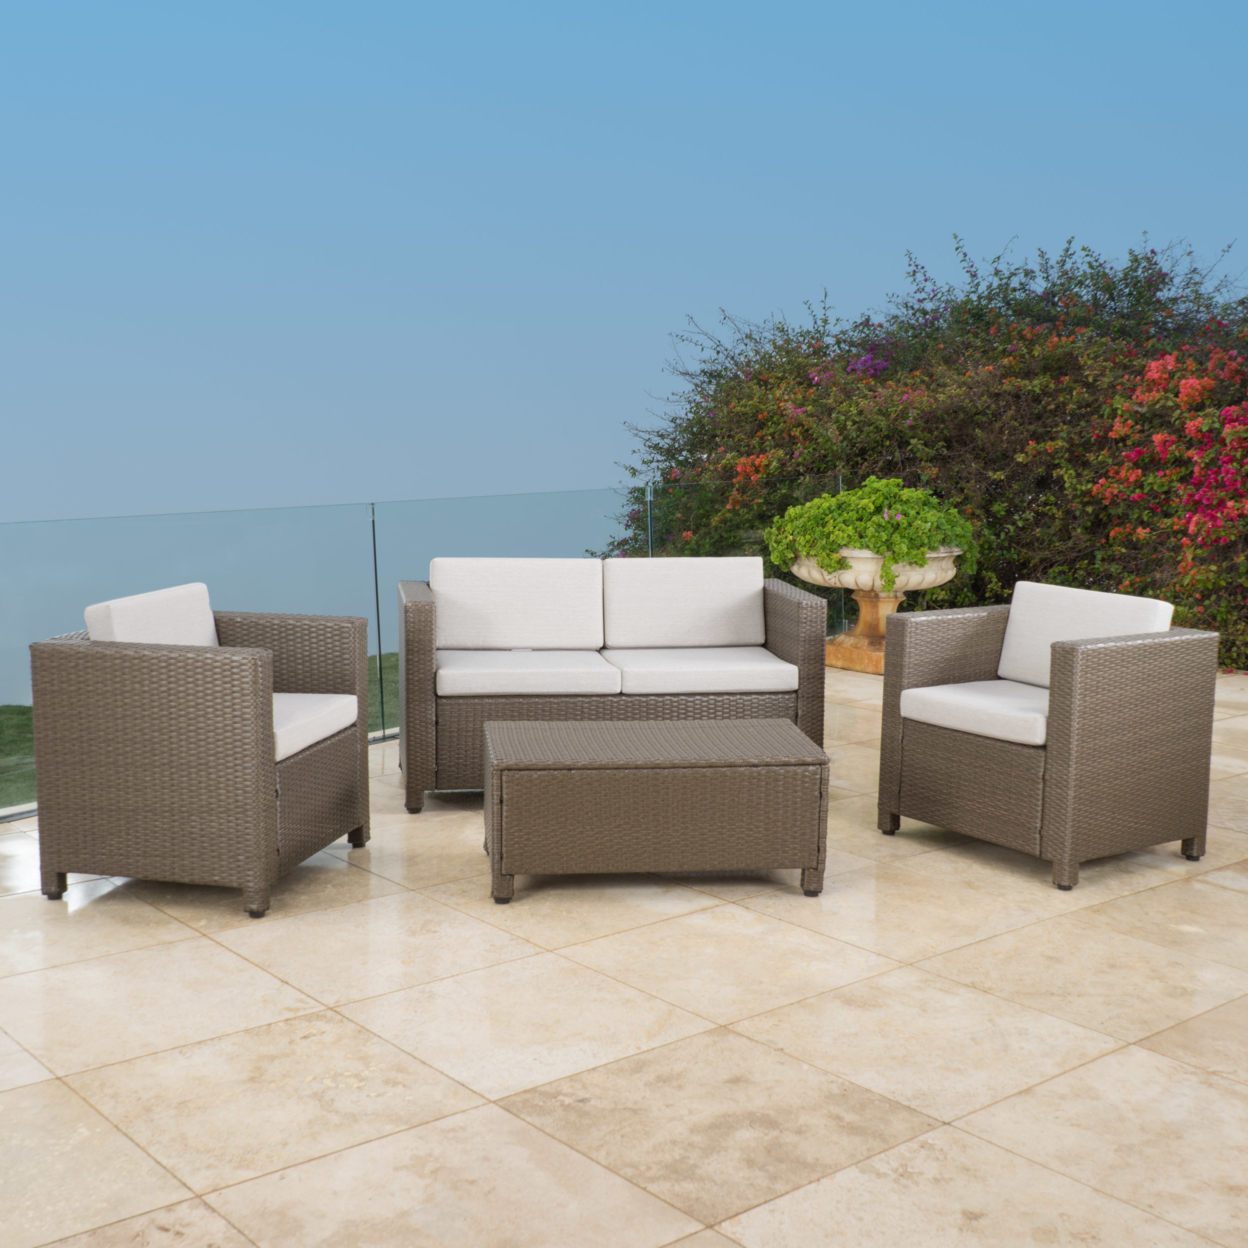 Pueblo 4 Piece Wicker Chat Set With Water Resistant Cushions & Cover - Brown/Ceramic Gray